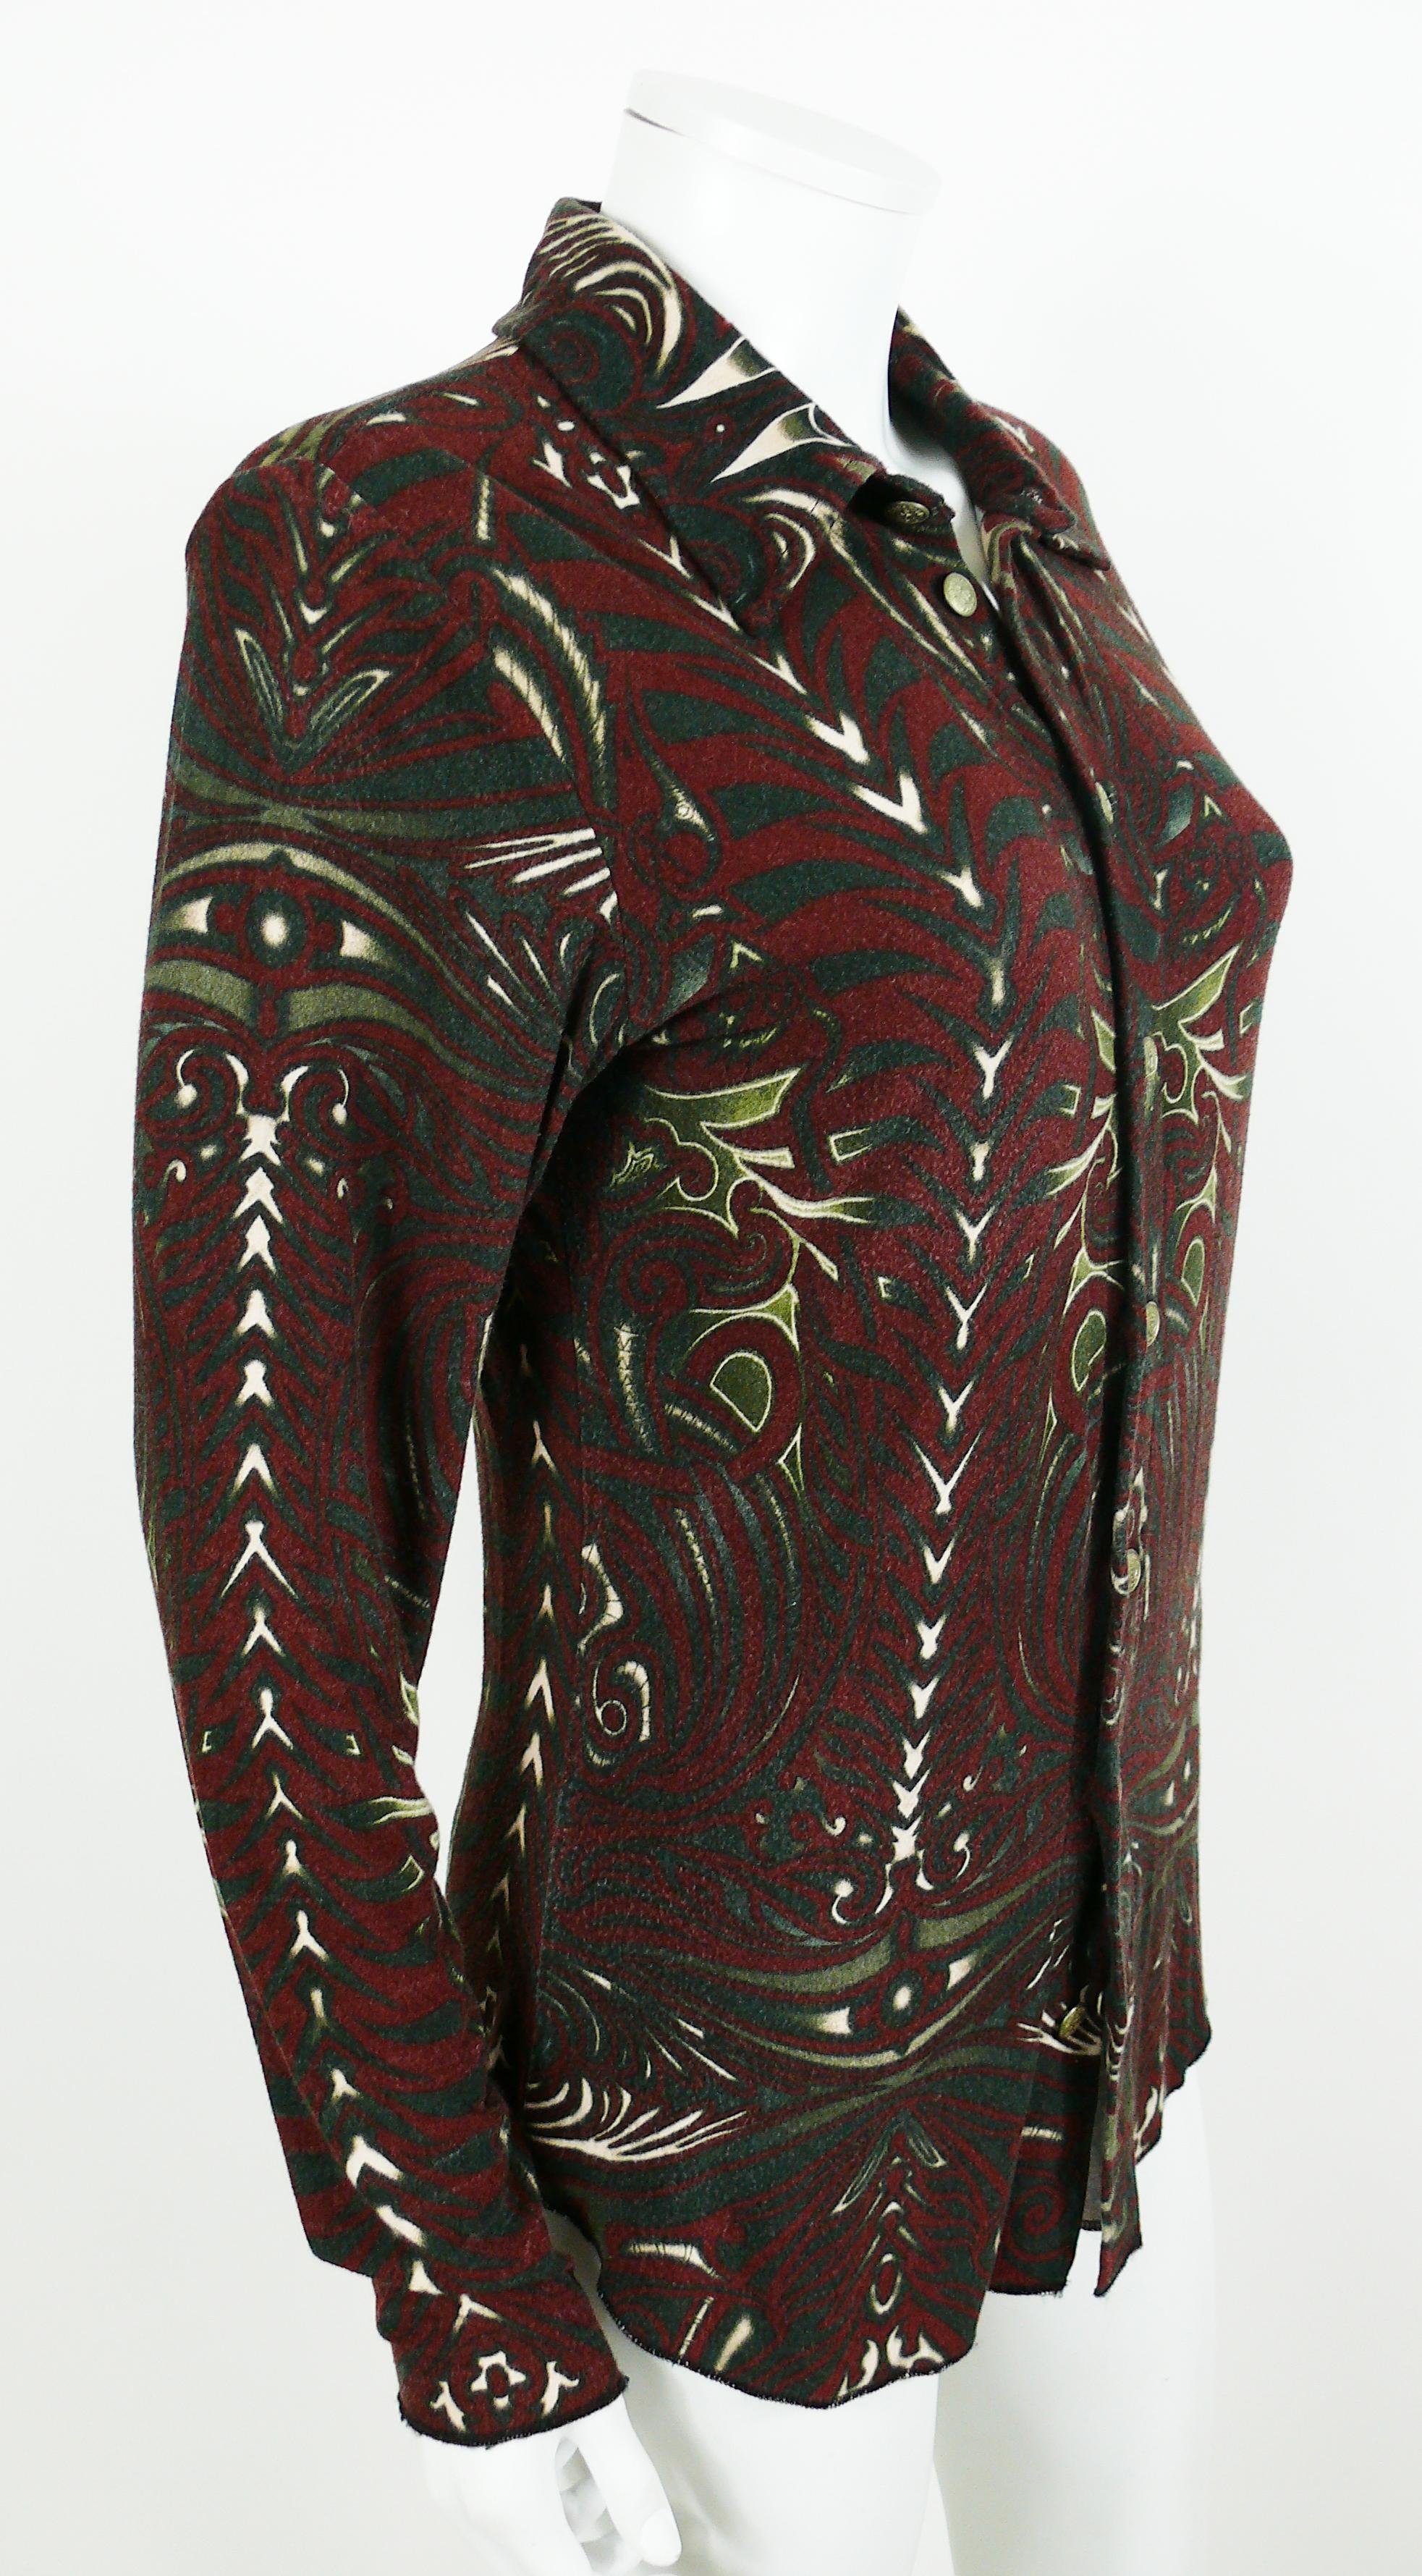 Jean Paul Gaultier vintage shirt featuring an opulent Aboriginal Maori tattoo print.

Stretchy material.
Please note that the surface of the fabric has a slight texture which is inherent part of the design.

Label reads GAULTIER JEAN'S.
Made in